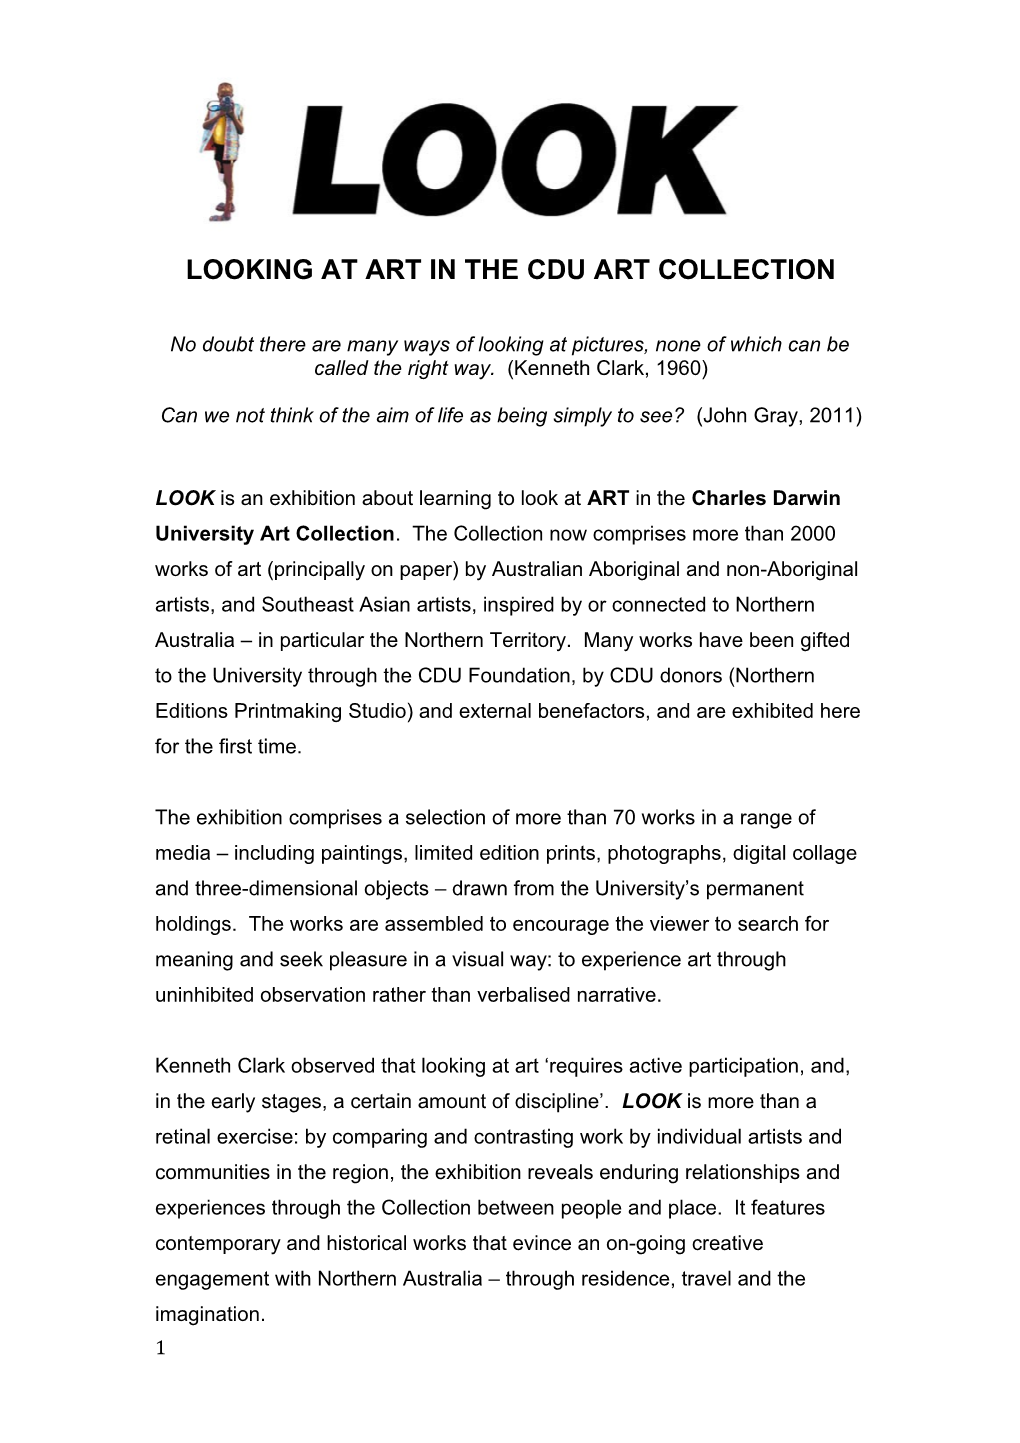 Looking at Art in the Cdu Art Collection